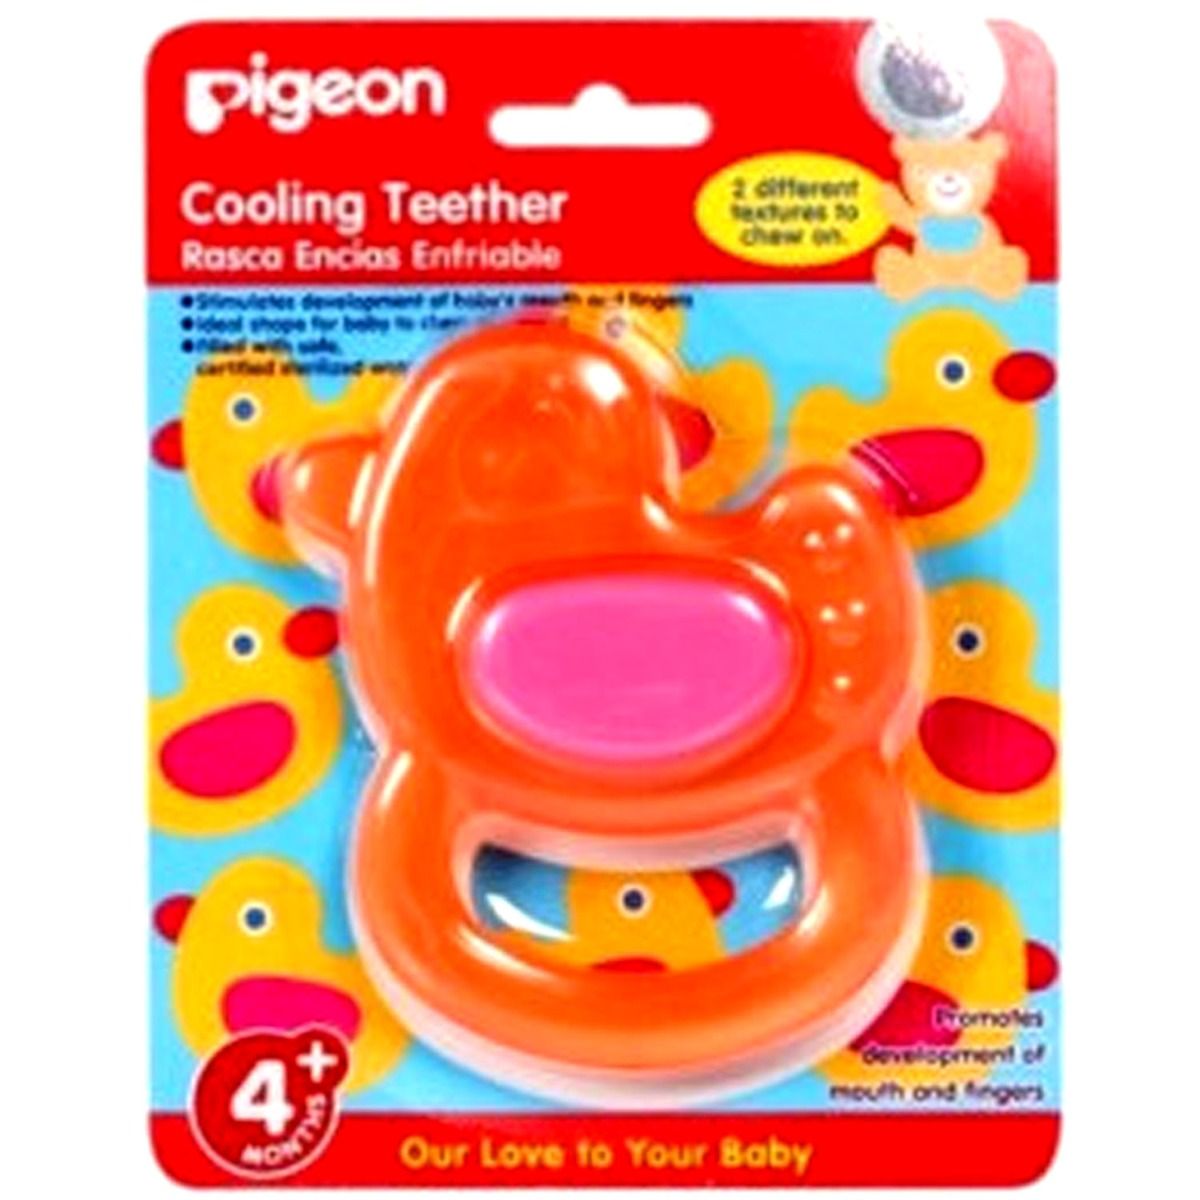 Pigeon Duck Shape Cooling Teether, 1 Count Price, Uses, Side Effects,  Composition - Apollo Pharmacy